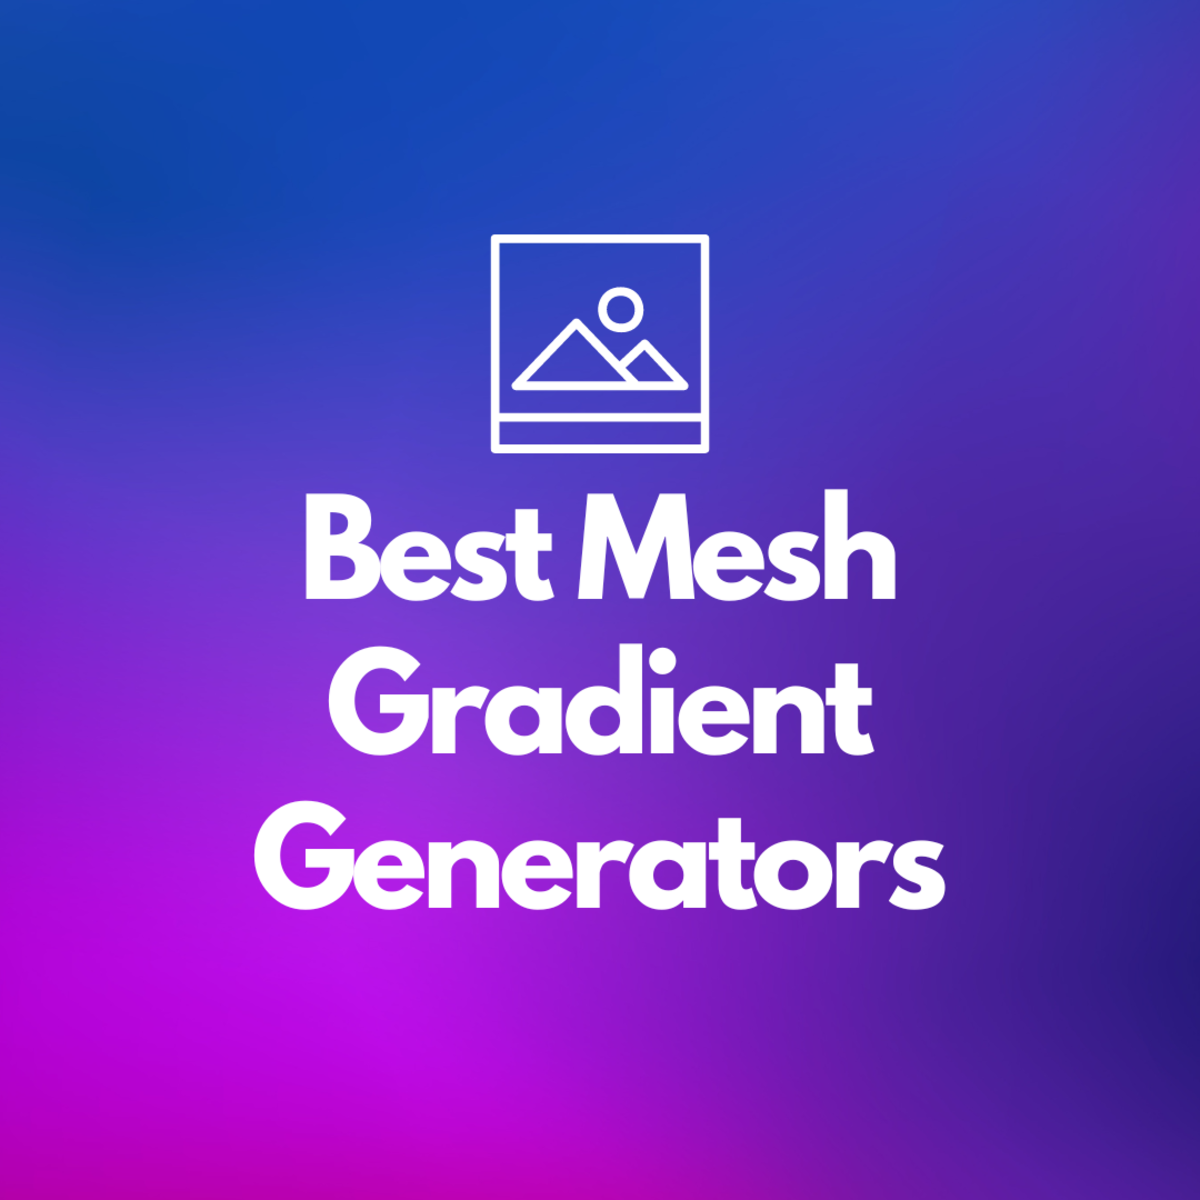 In this list, discover some of the best mesh gradient generators for your projects.